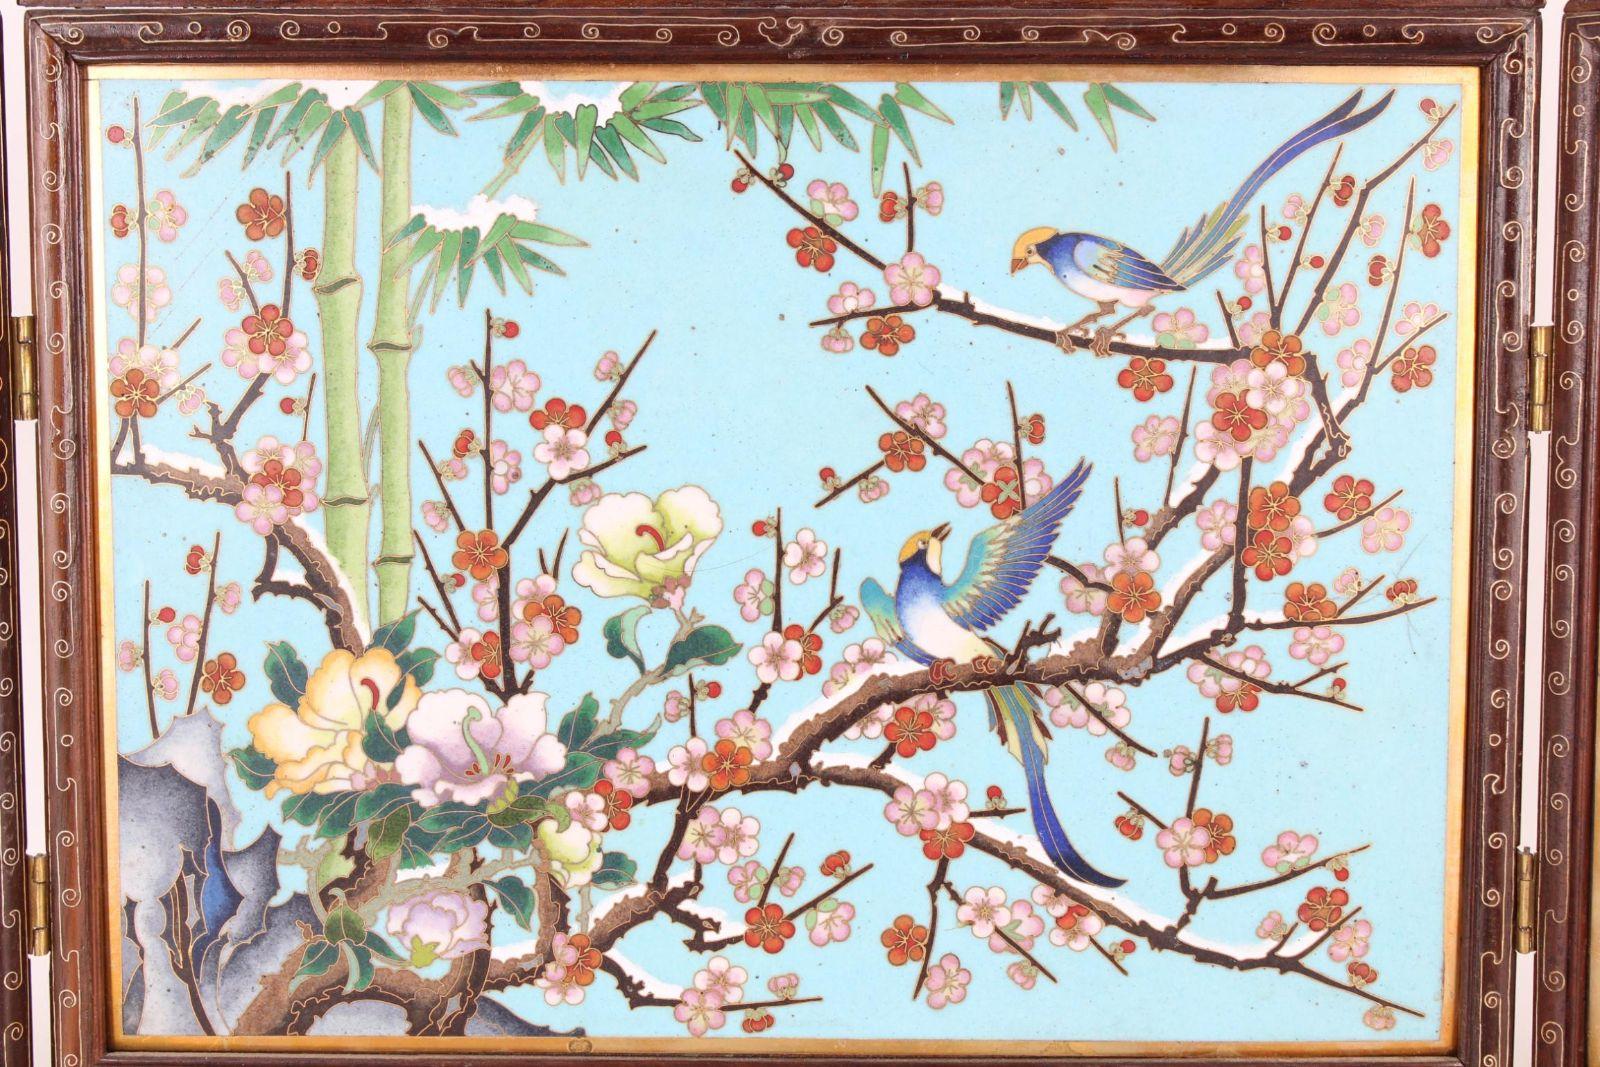 Very fine quality Chinese Cloisonne Enamel and hardwood table screen with birds and flowers motif.